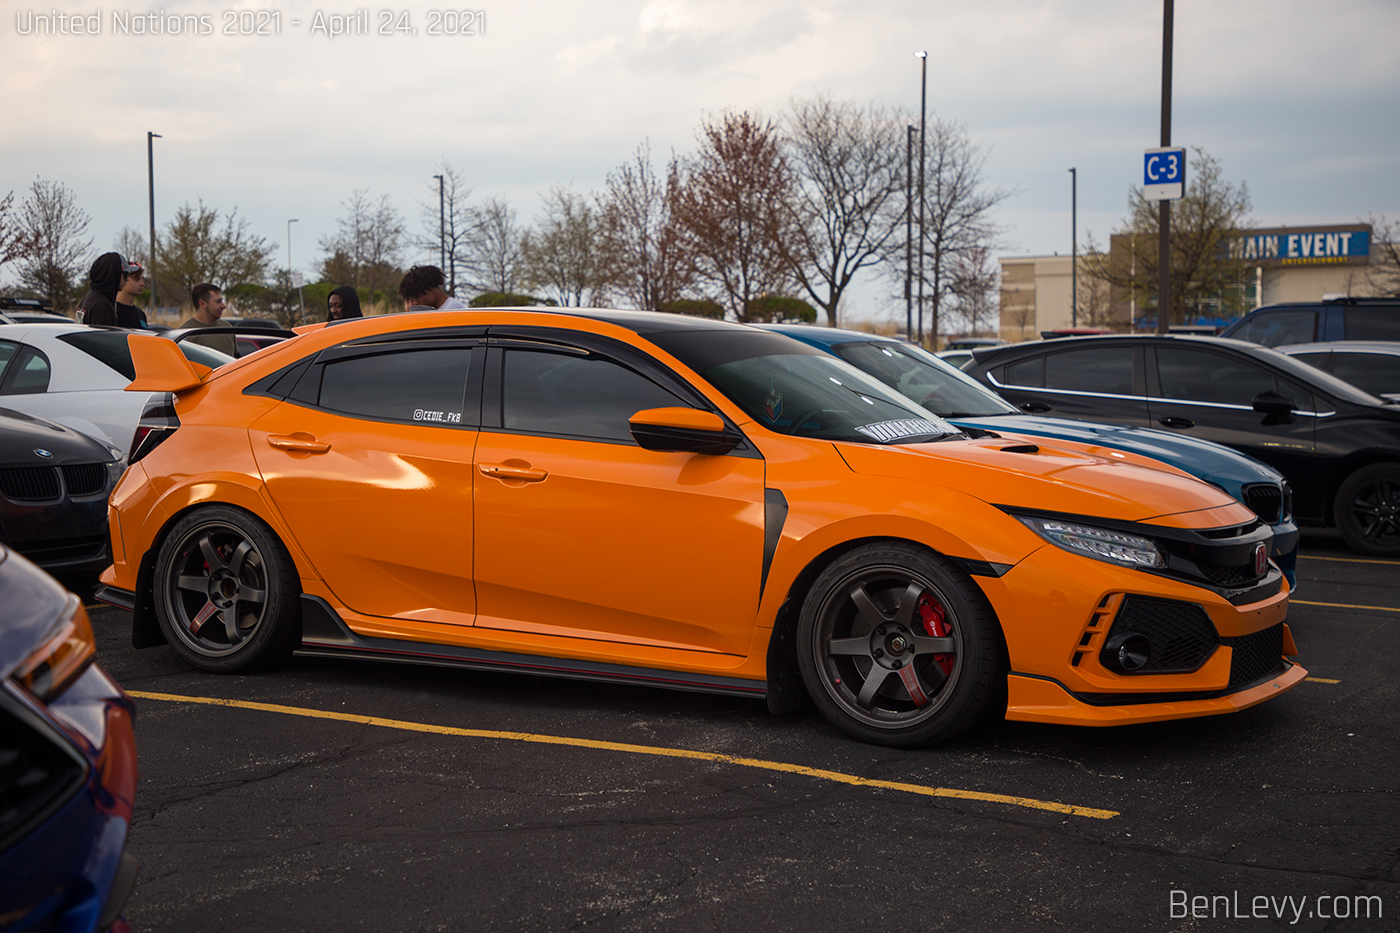 Orange Wrap on FK8 Civic Type-R at United Nations Car Show